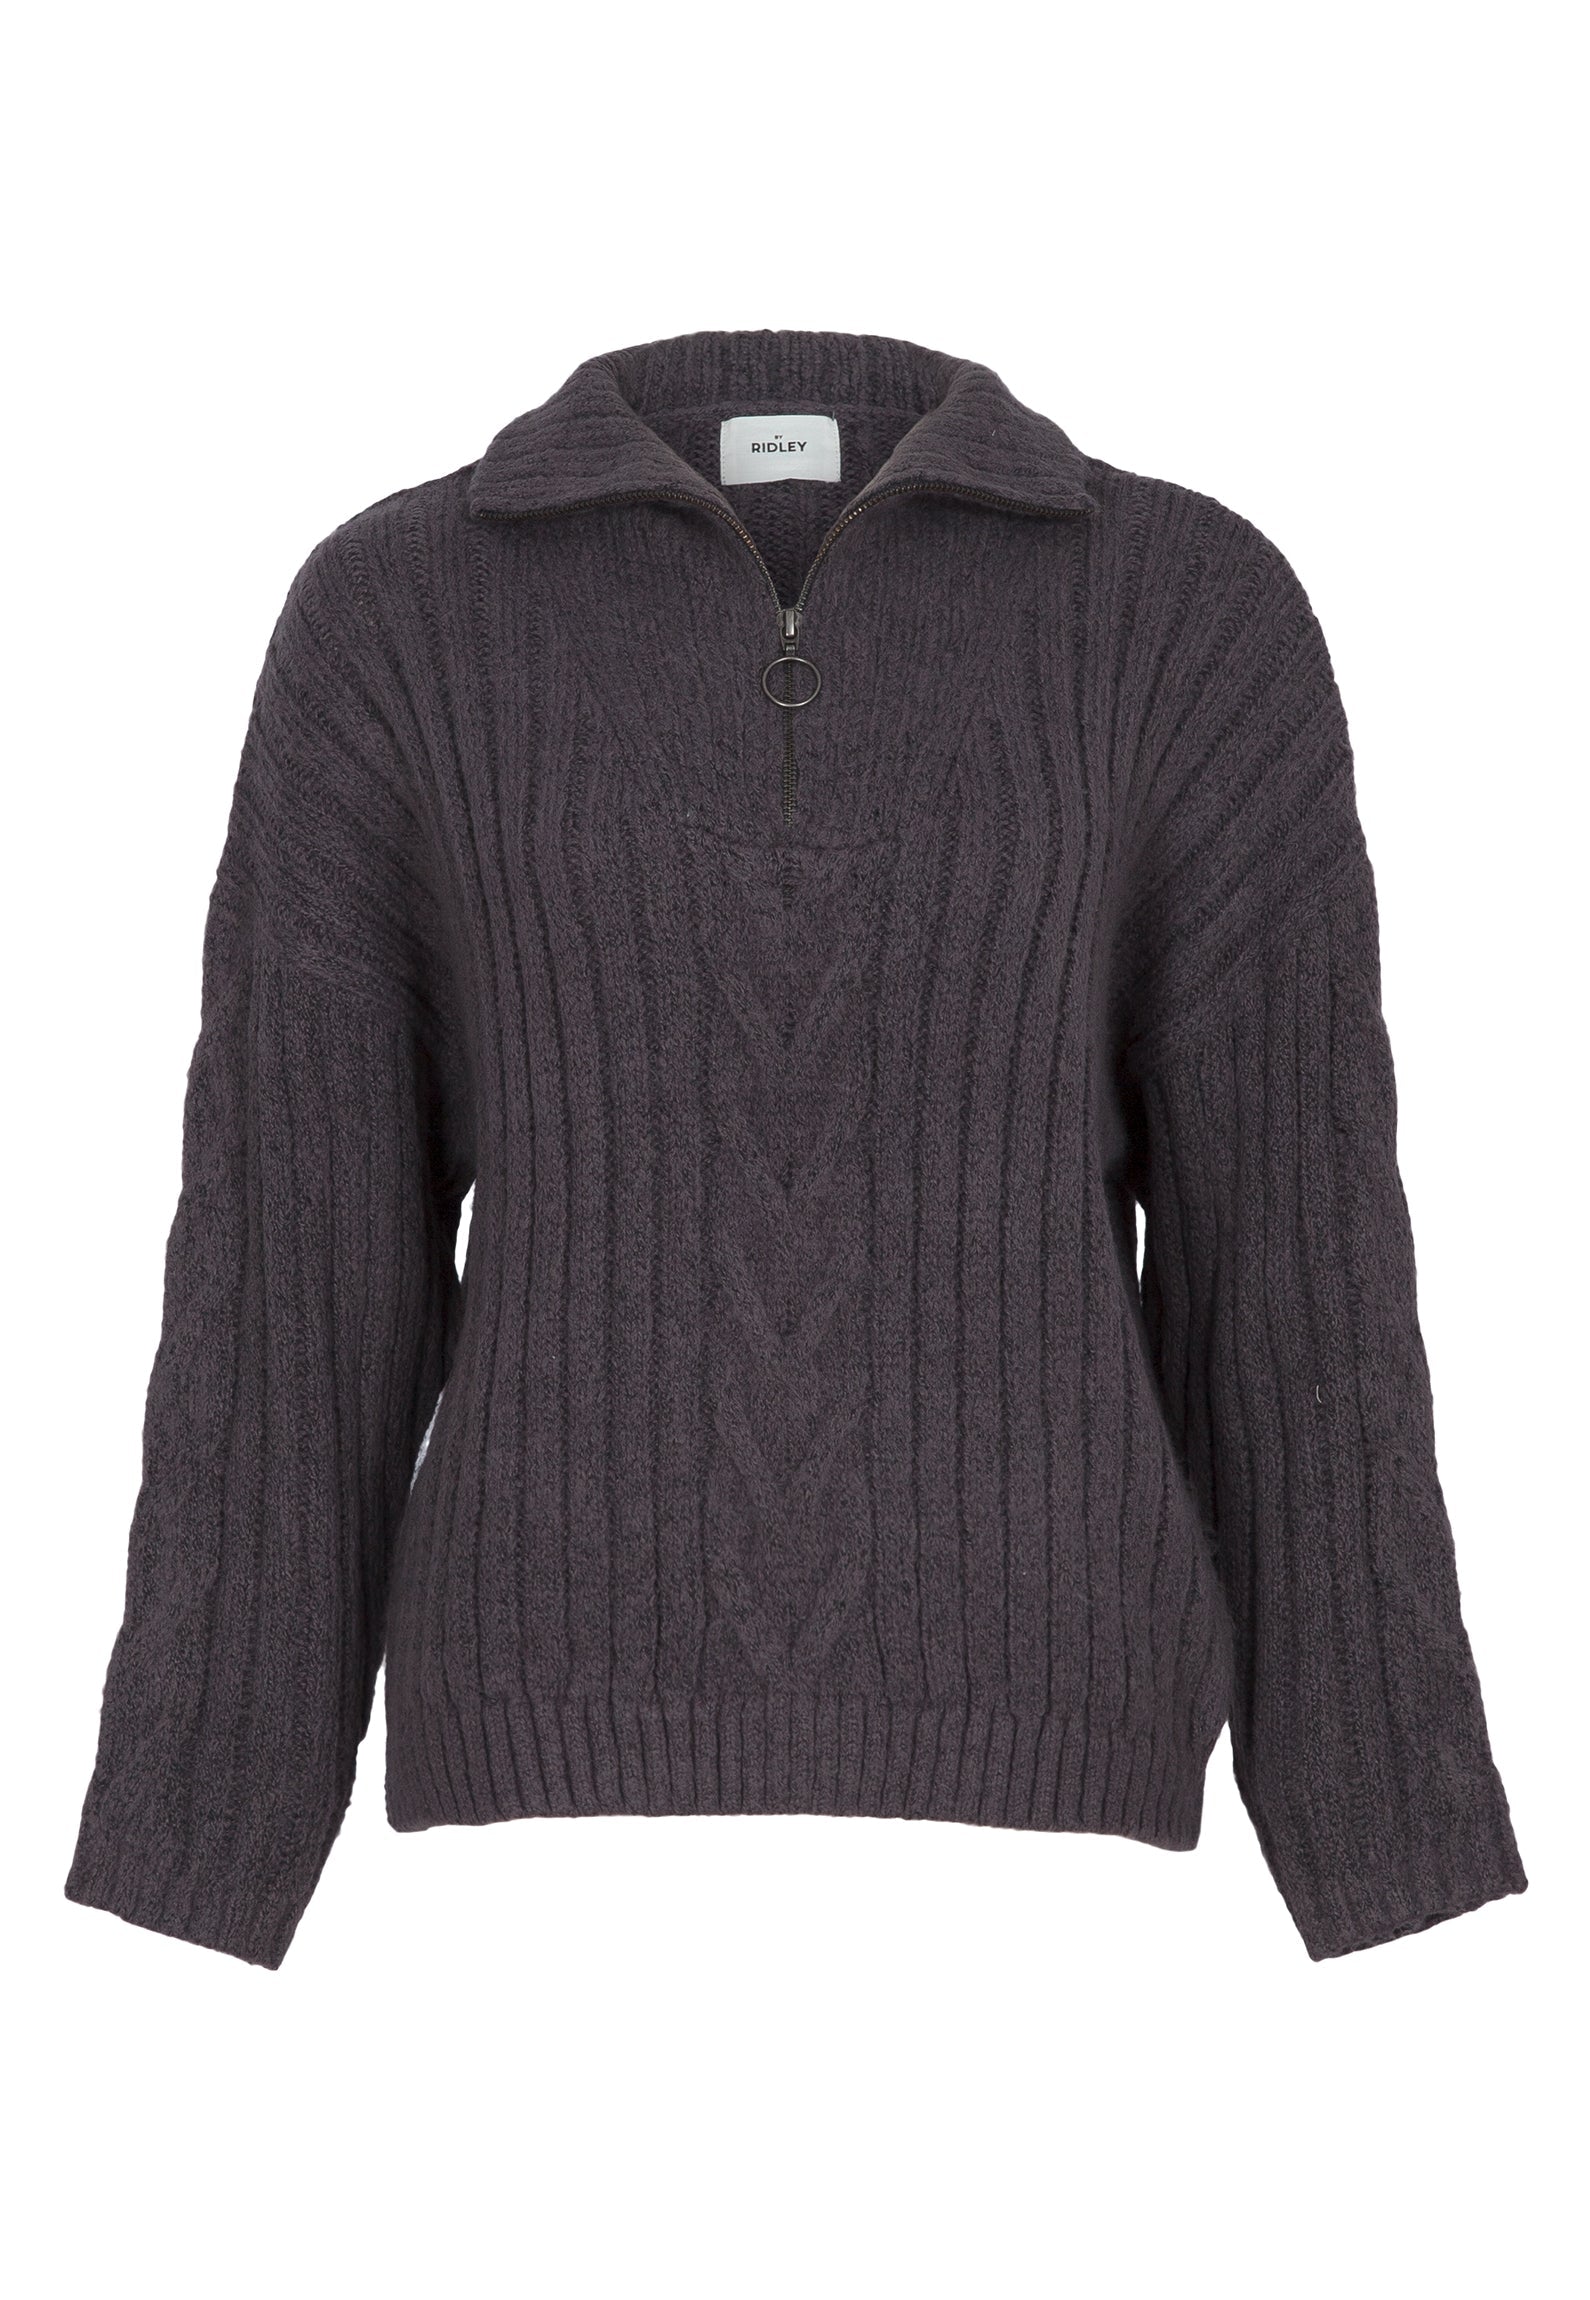 Chloe Sweater - Charcoal-Knitwear & Jumpers-By RIDLEY-The Bay Room